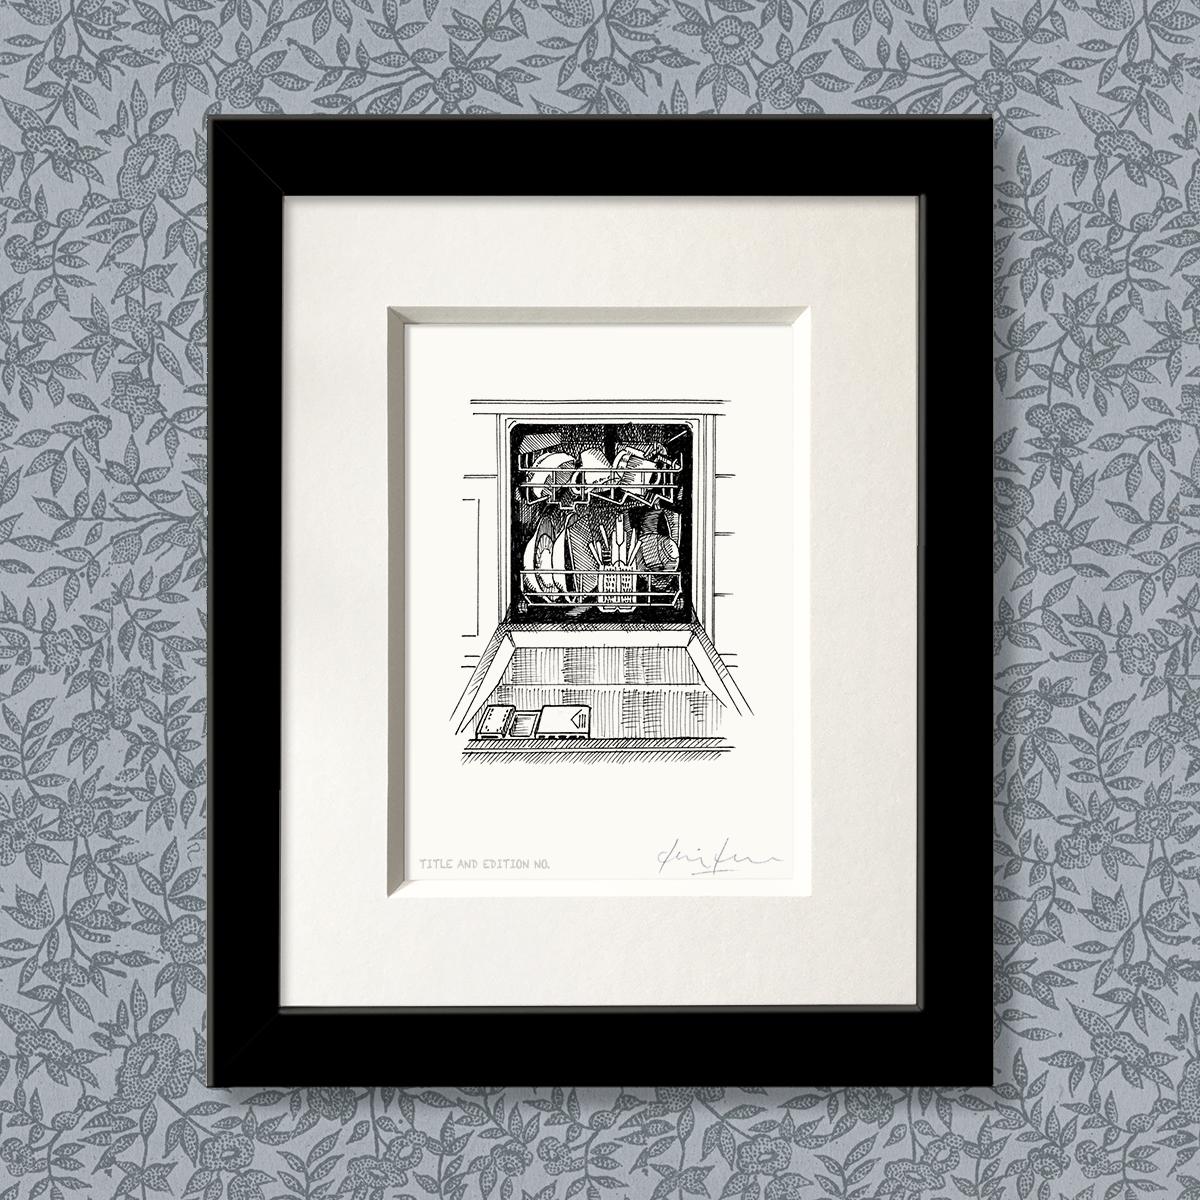 Limited edition print from pen and ink drawing of the inside of a dishwasher in a black frame